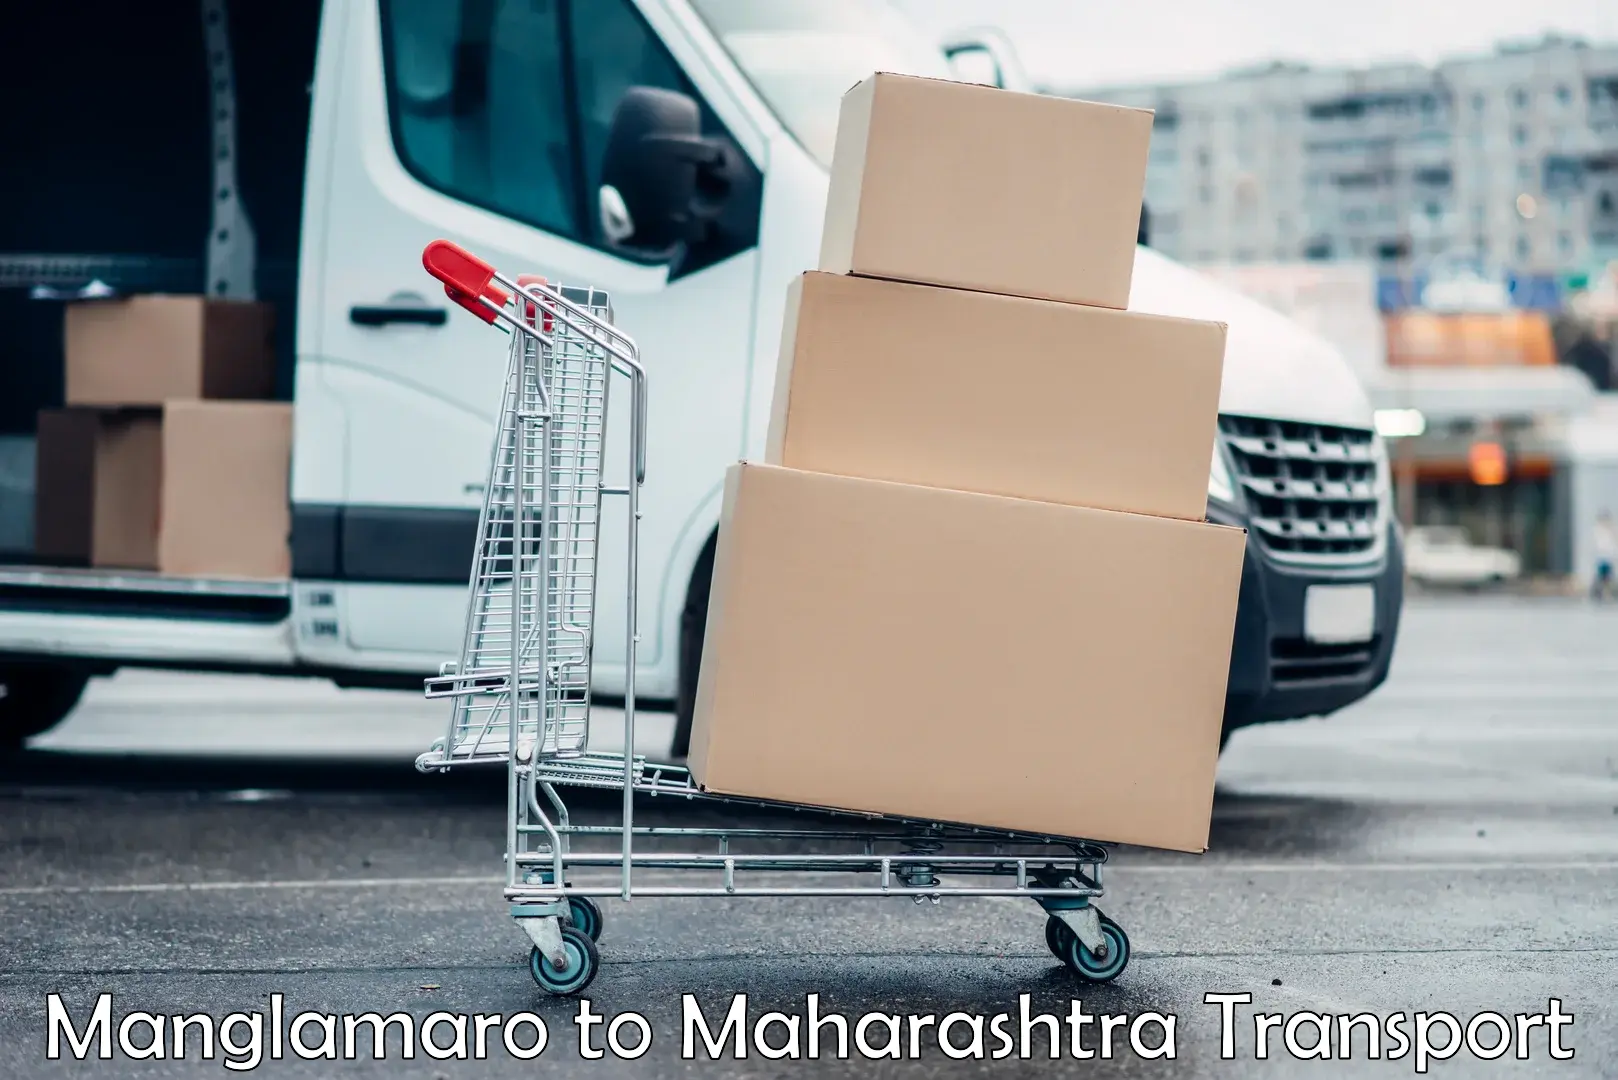 Daily parcel service transport in Manglamaro to Chopda